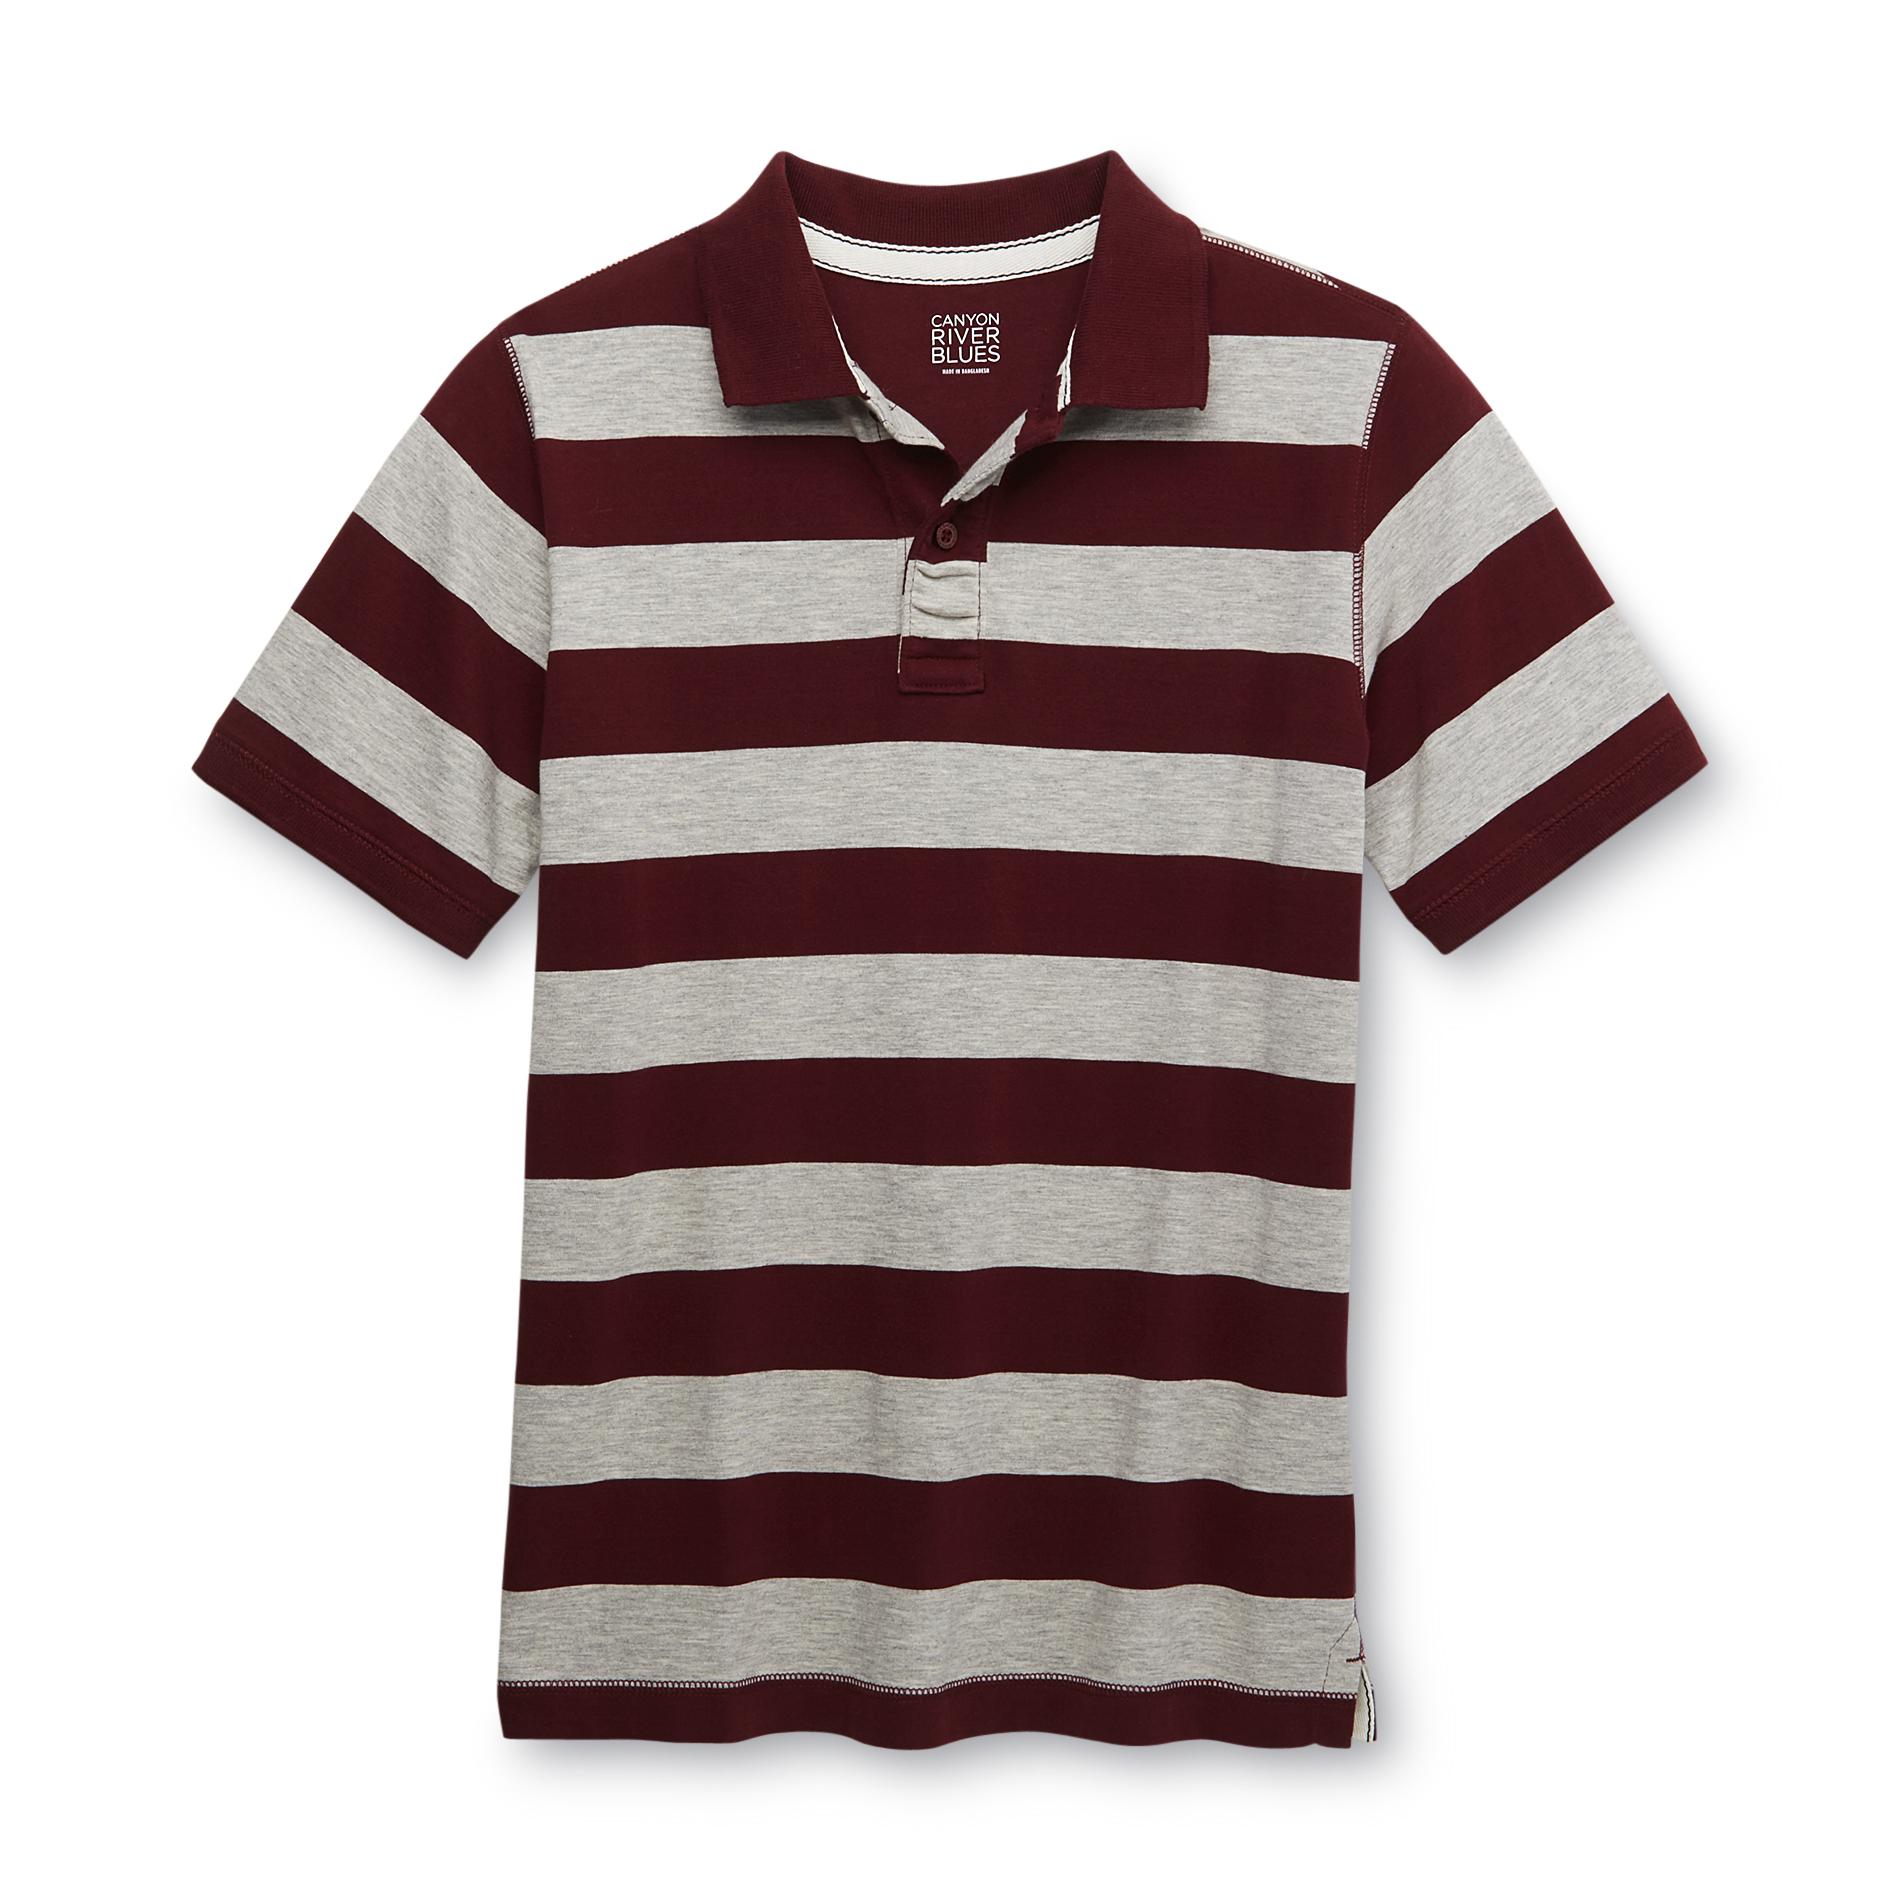 Canyon River Blues Boy's Polo Shirt - Rugby Striped